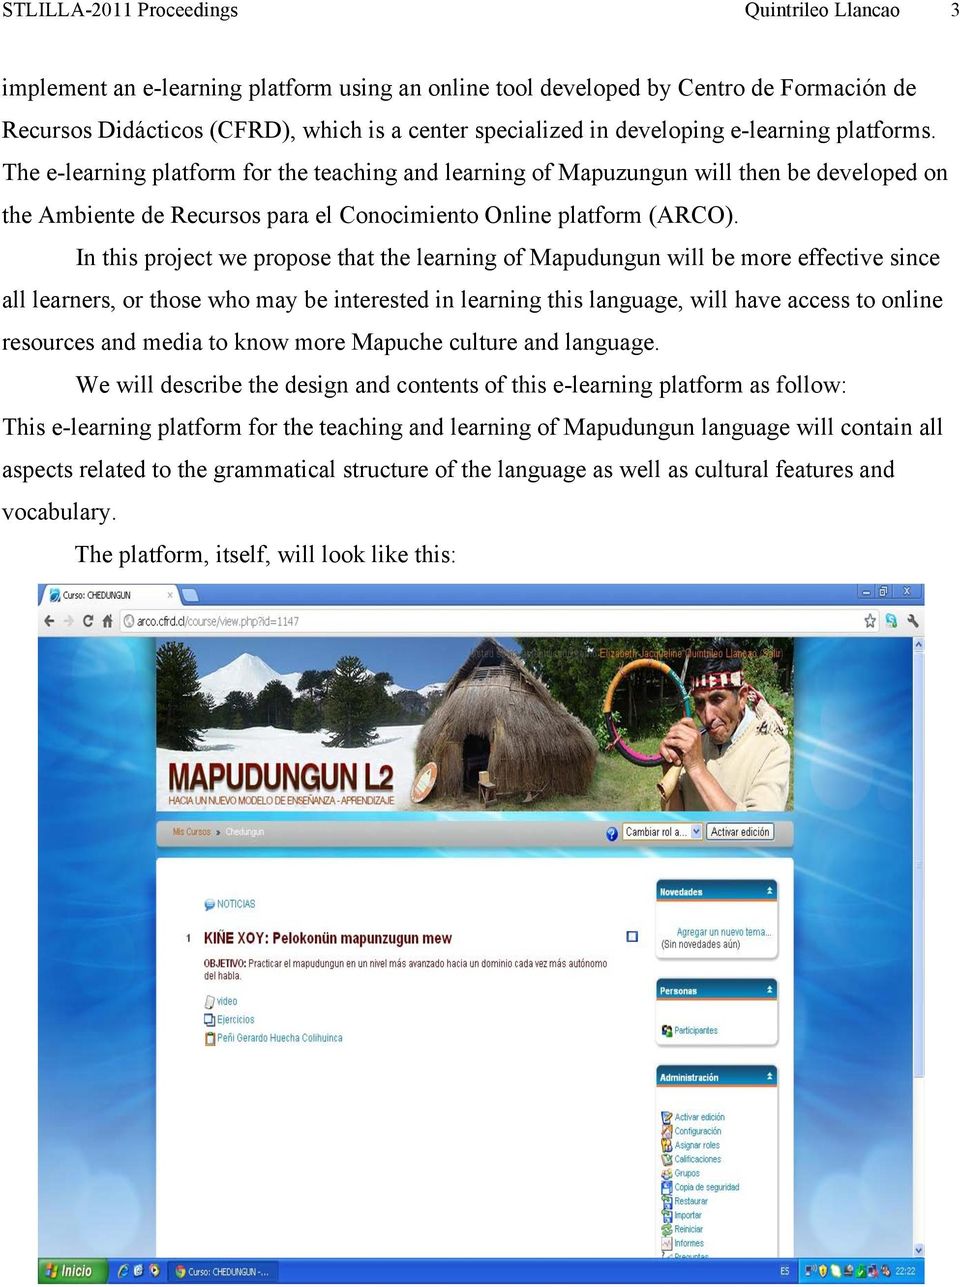 In this project we propose that the learning of Mapudungun will be more effective since all learners, or those who may be interested in learning this language, will have access to online resources